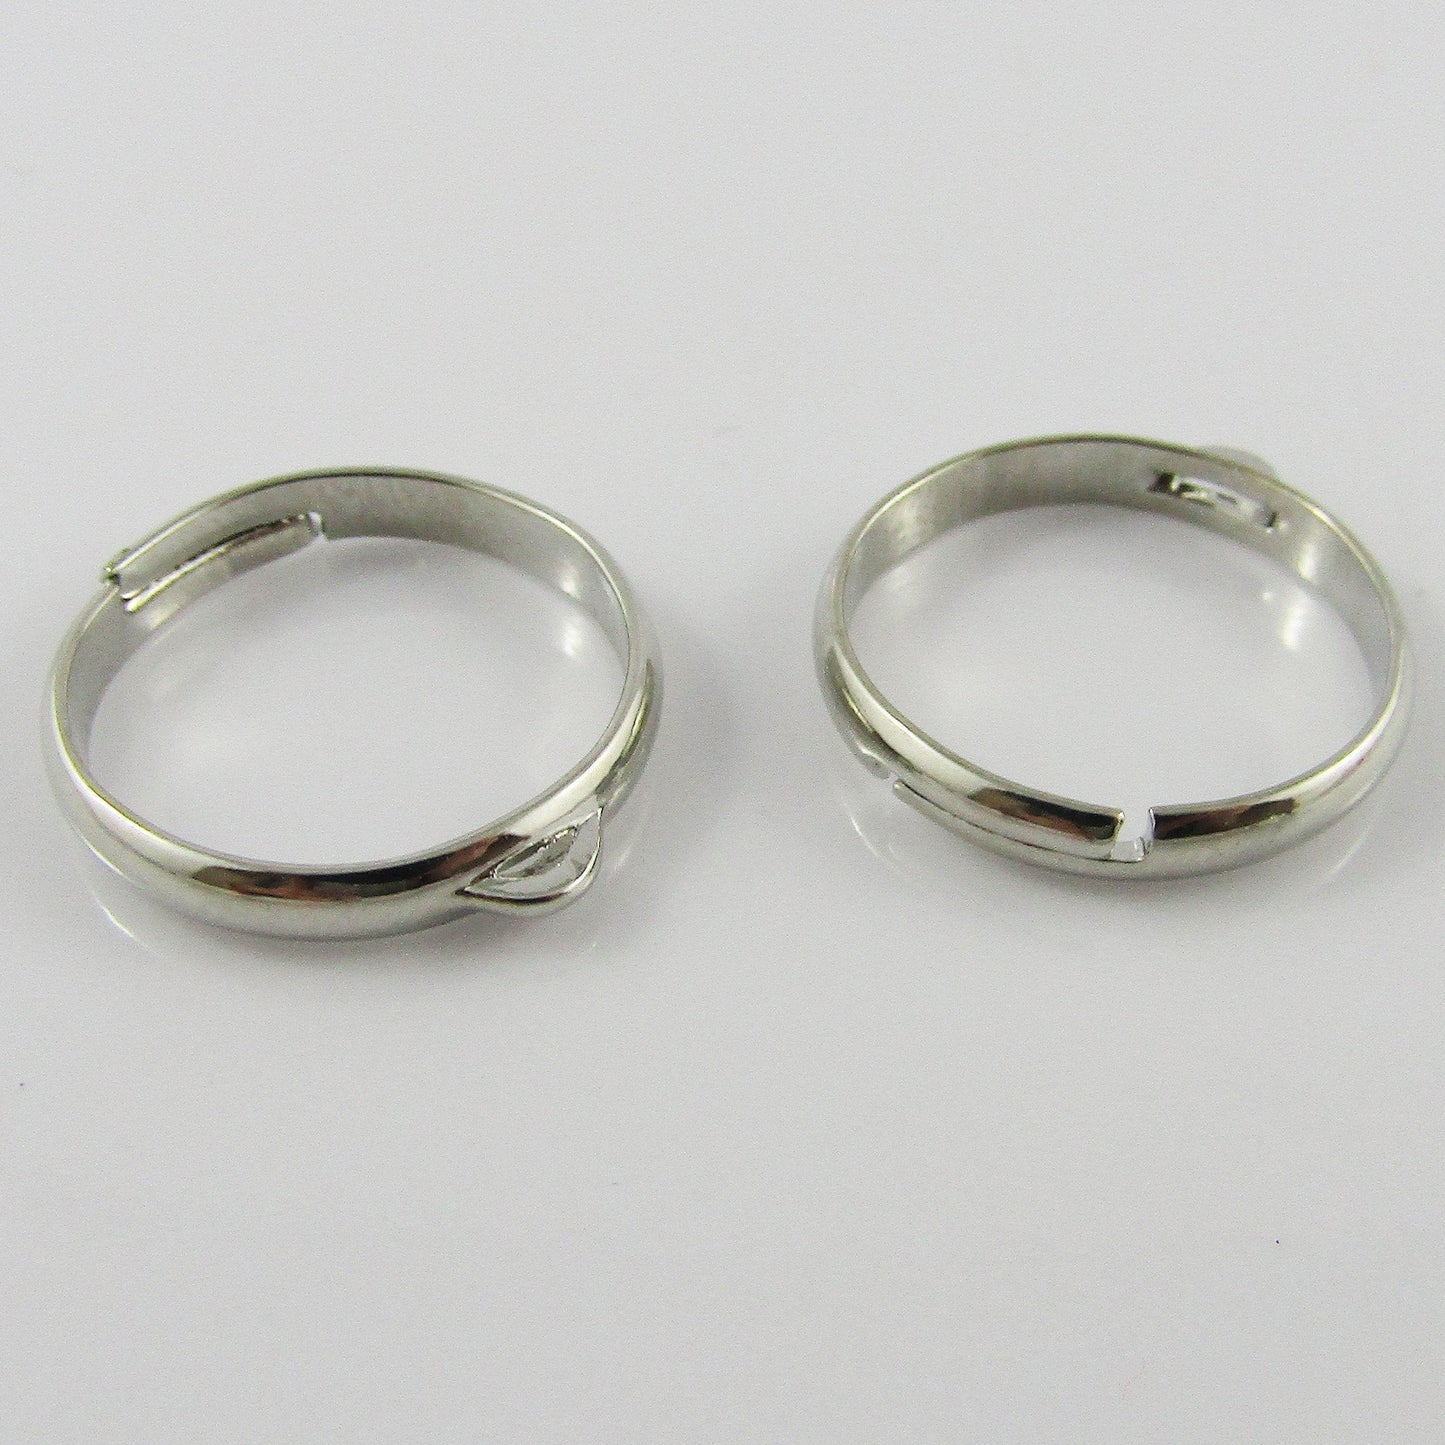 Bulk 10pce DIY Adjustable Ring Base with Charm Loop 17mm Silver